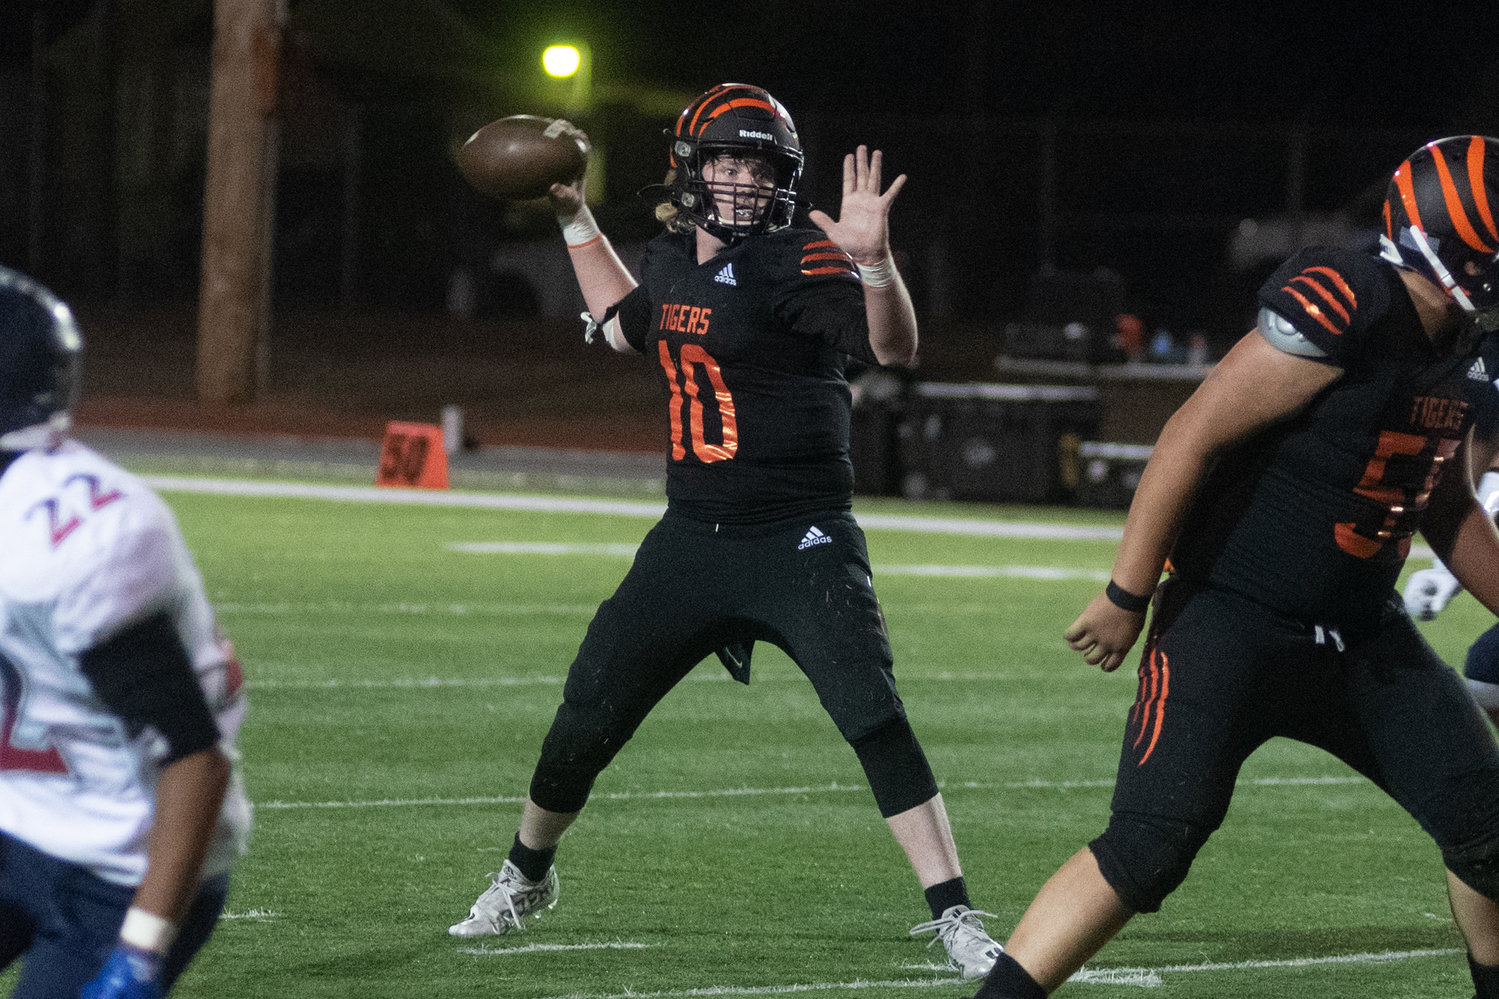 Centralia quarterback Landon Jenkins throws a pass in the Tigers loss to Black Hills Friday night.